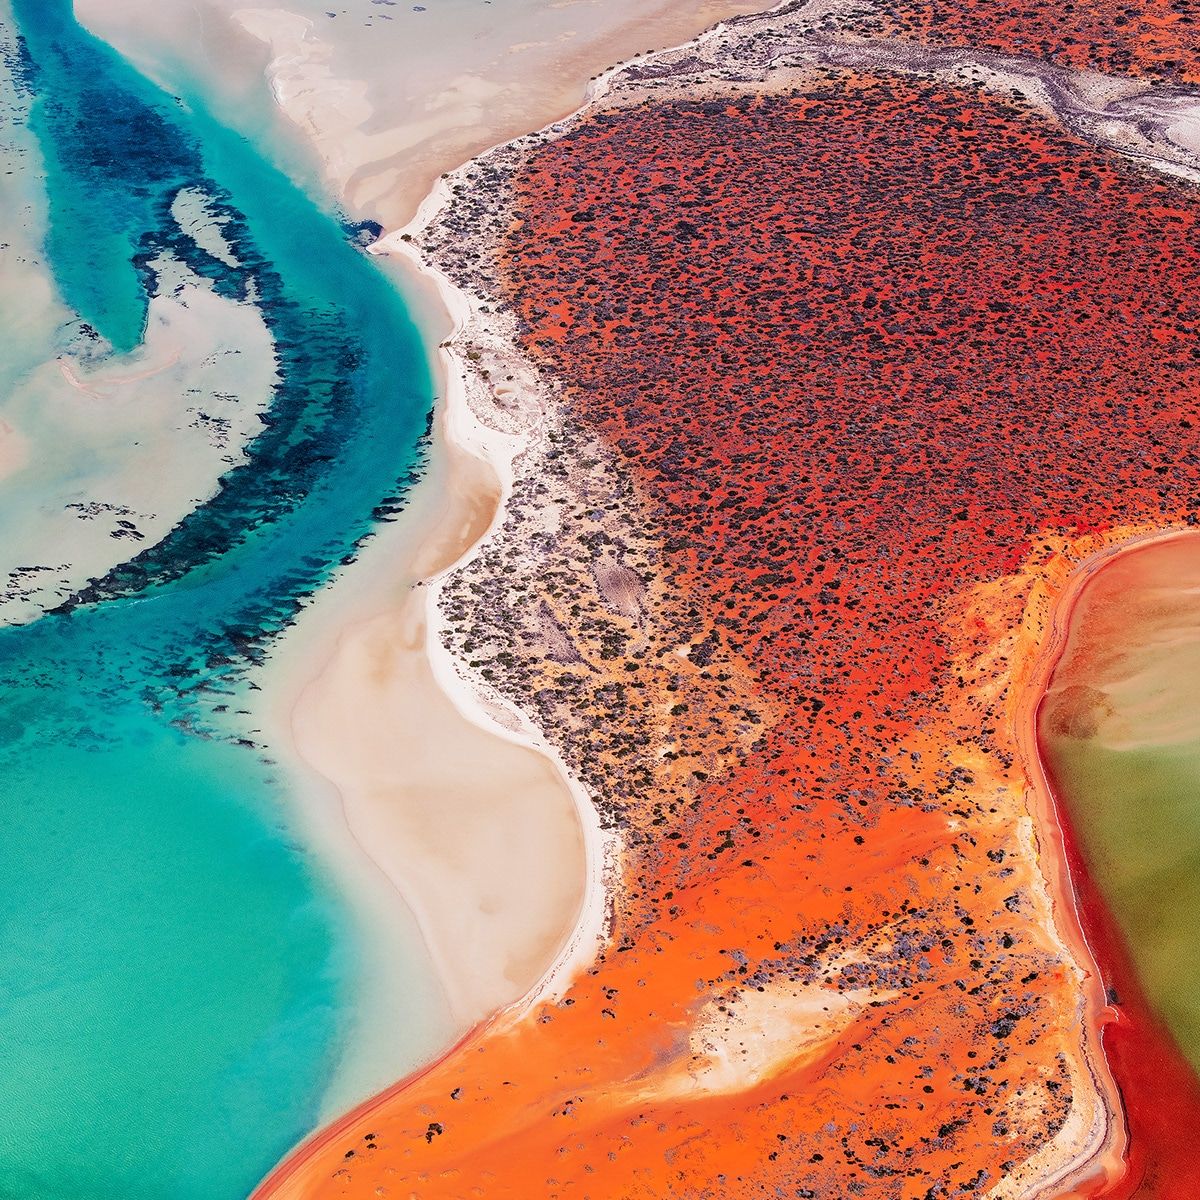 Interview: Capturing Naturally Organic Formations of Australia’s Shark Bay From Above